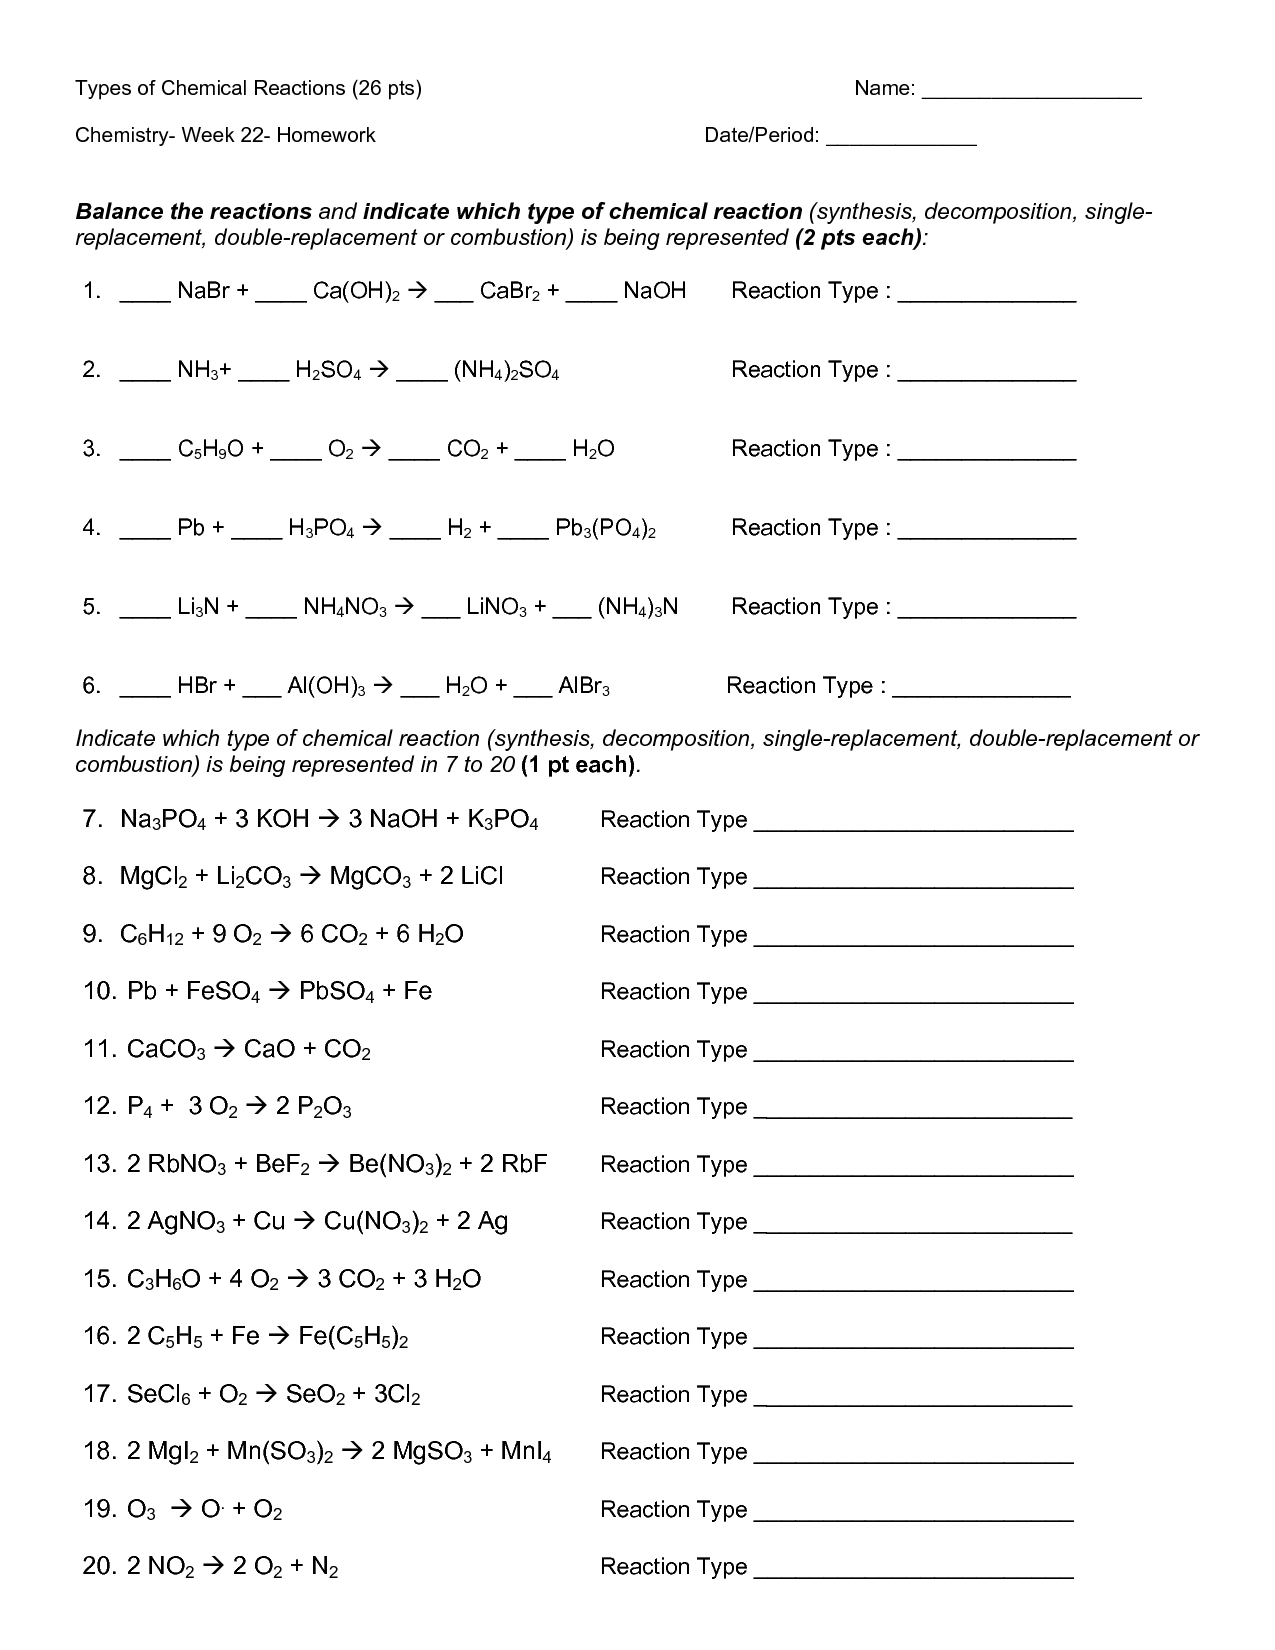 14-best-images-of-chemical-reactions-worksheet-types-chemical-reactions-worksheets-answers